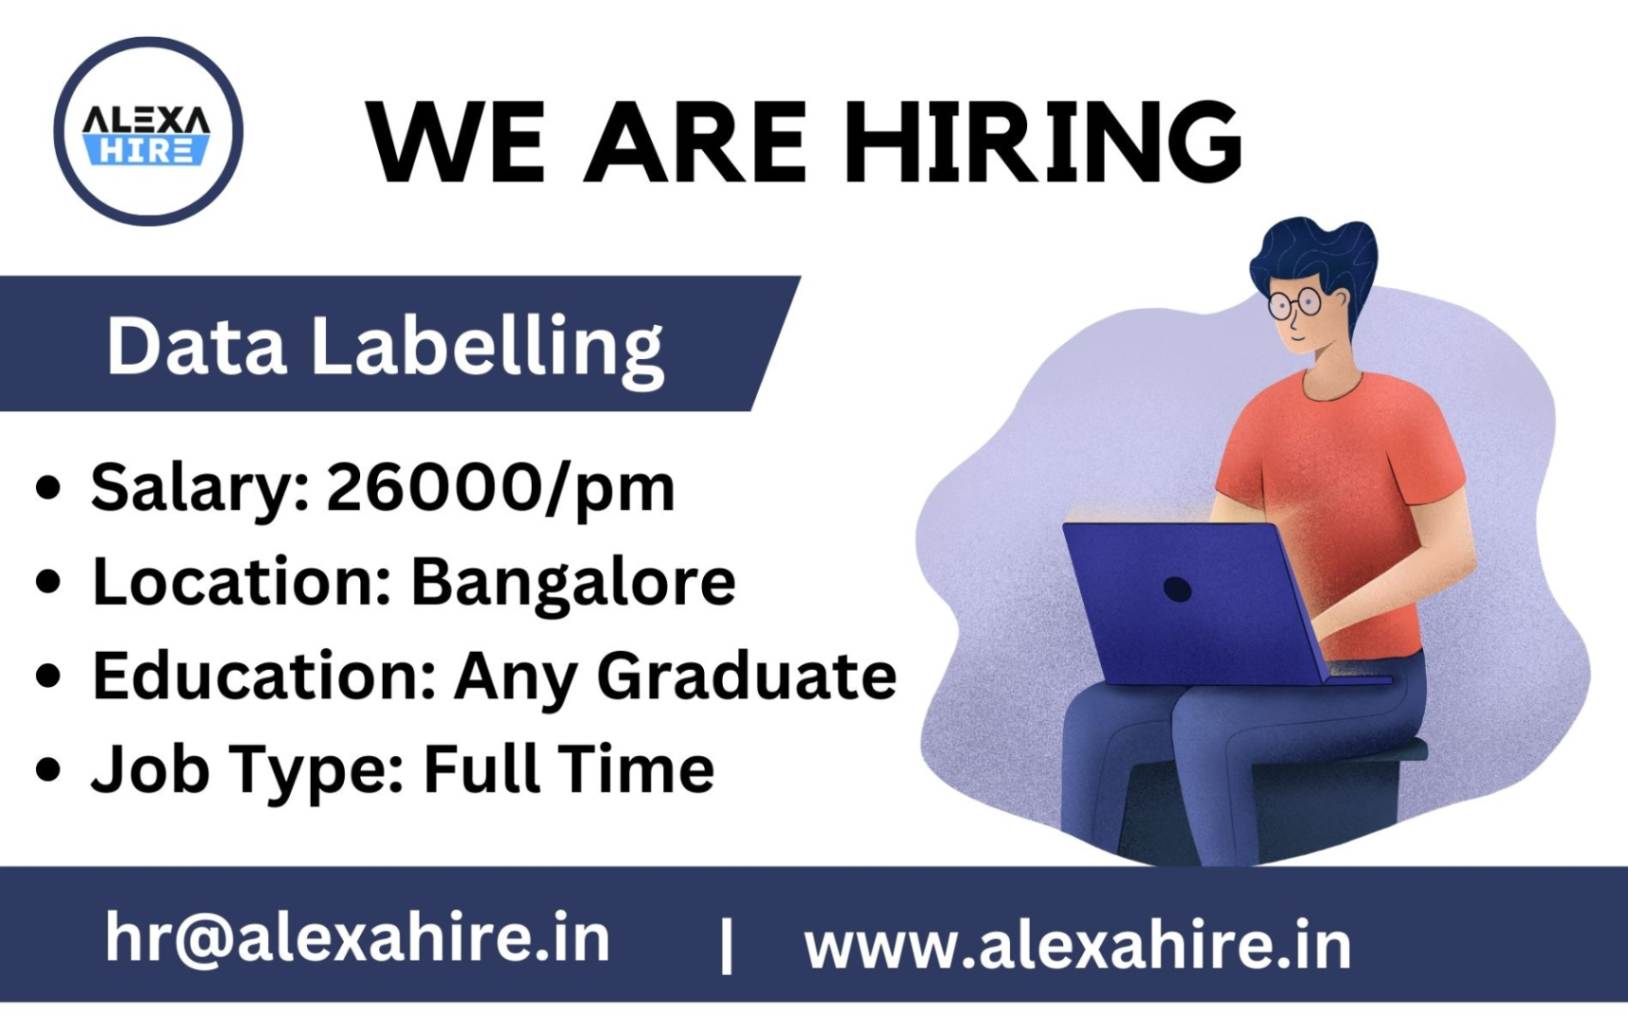 Data Labelling Jobs in Bangalore